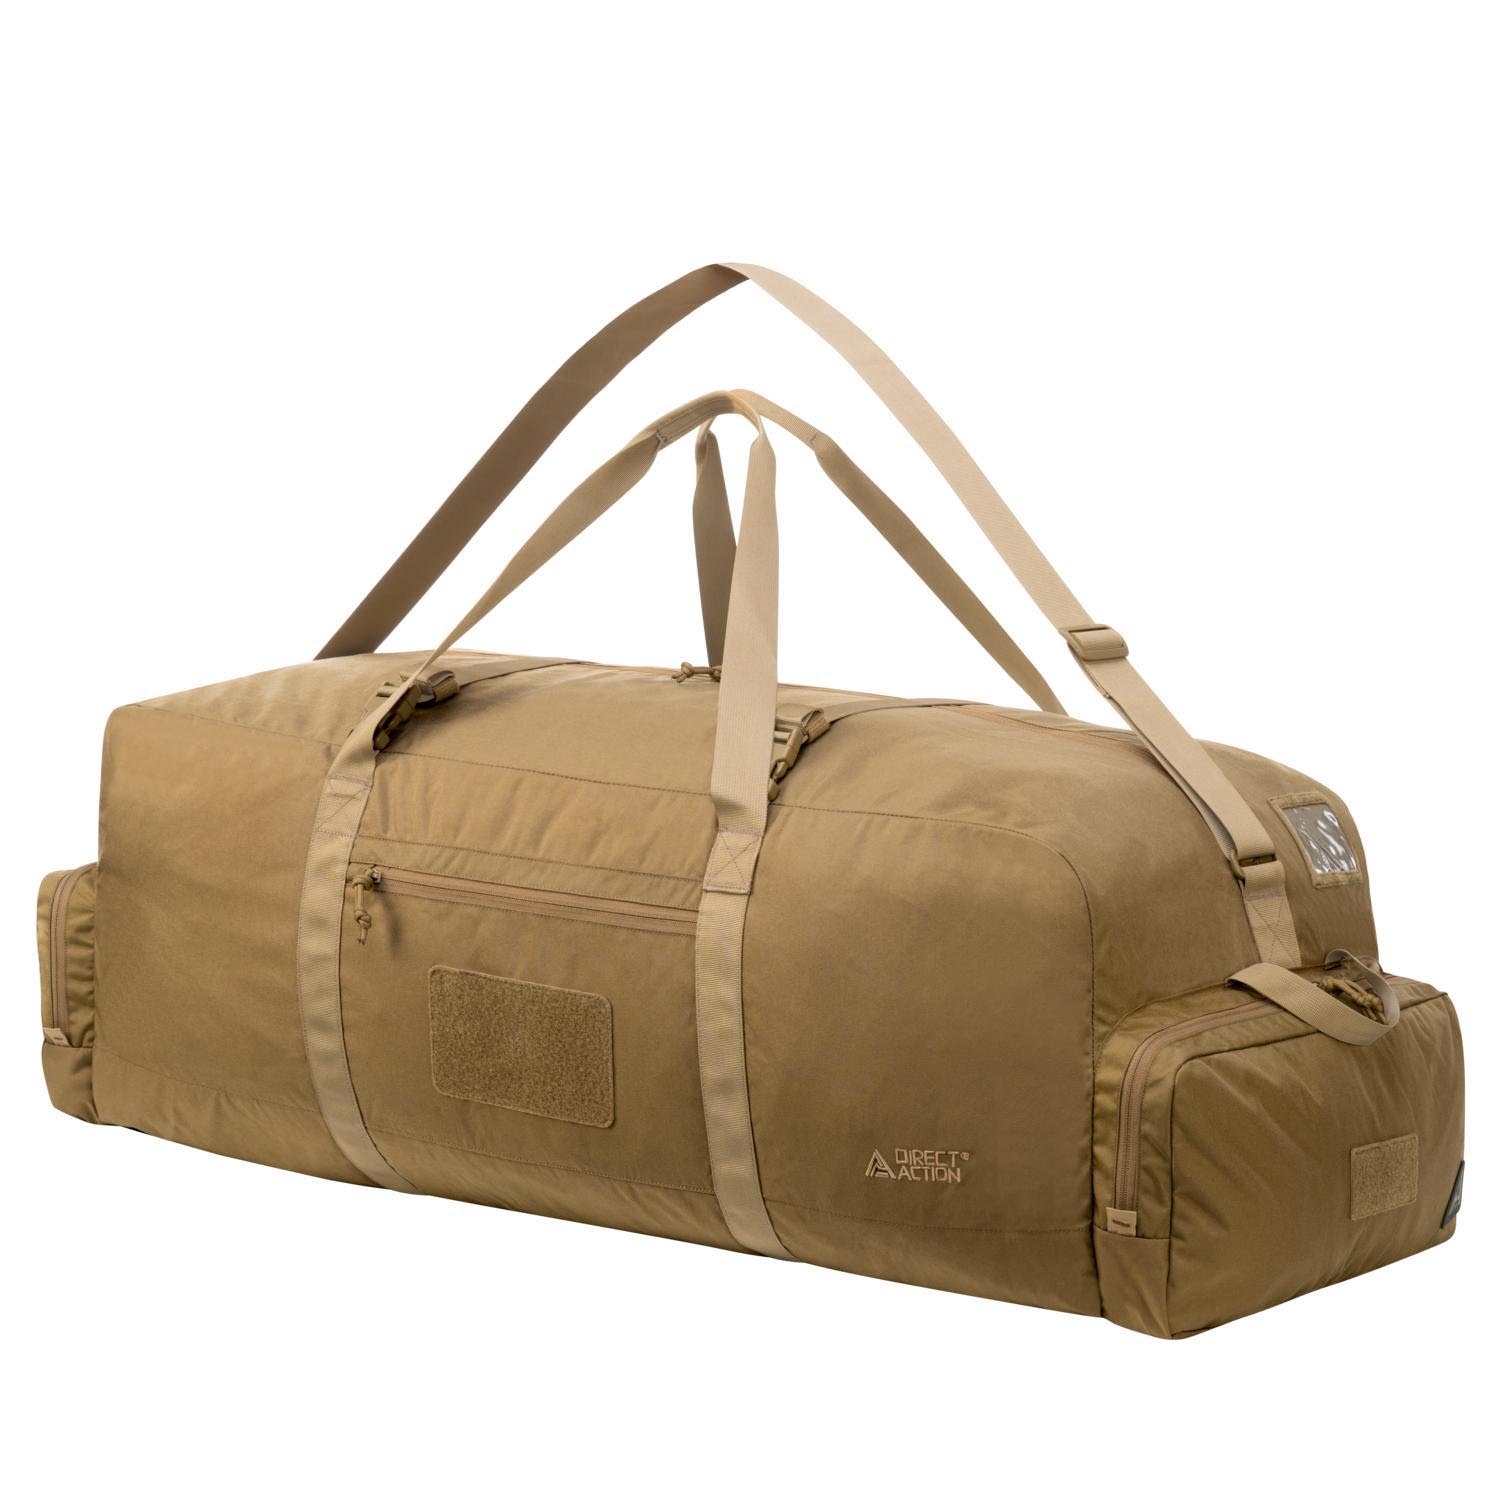 Direct Action Deployment Bag Large coyote